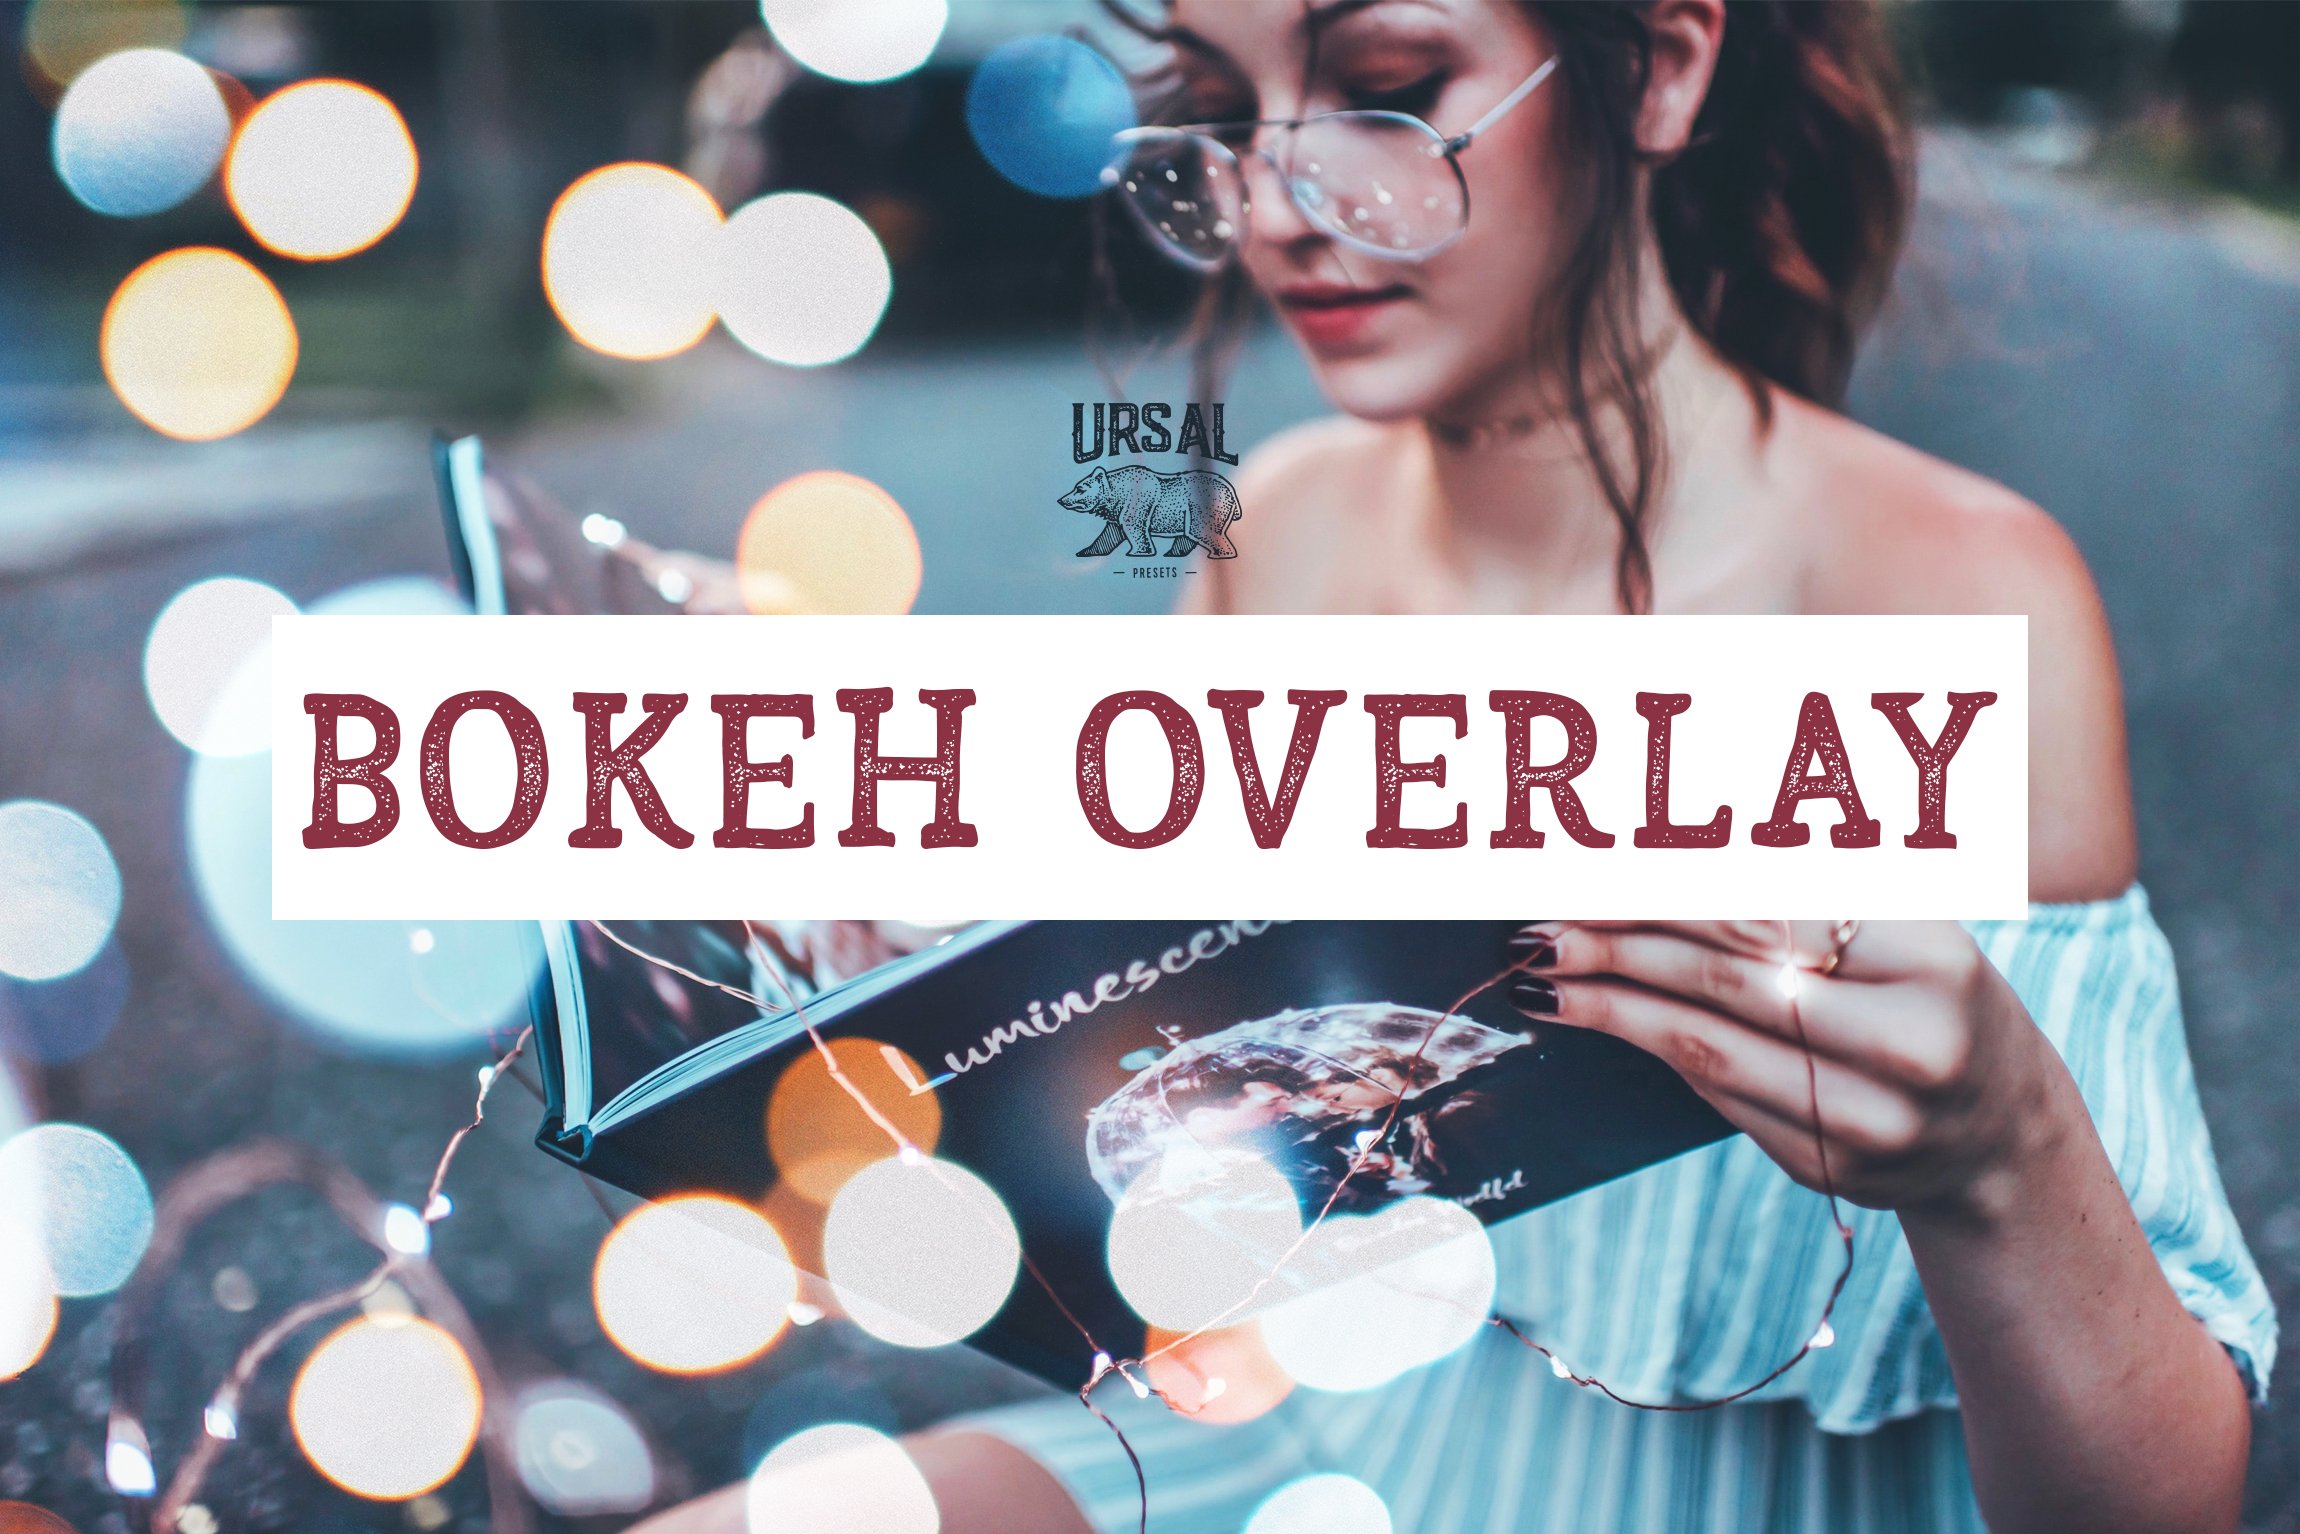 35 Bokeh Overlayscover image.